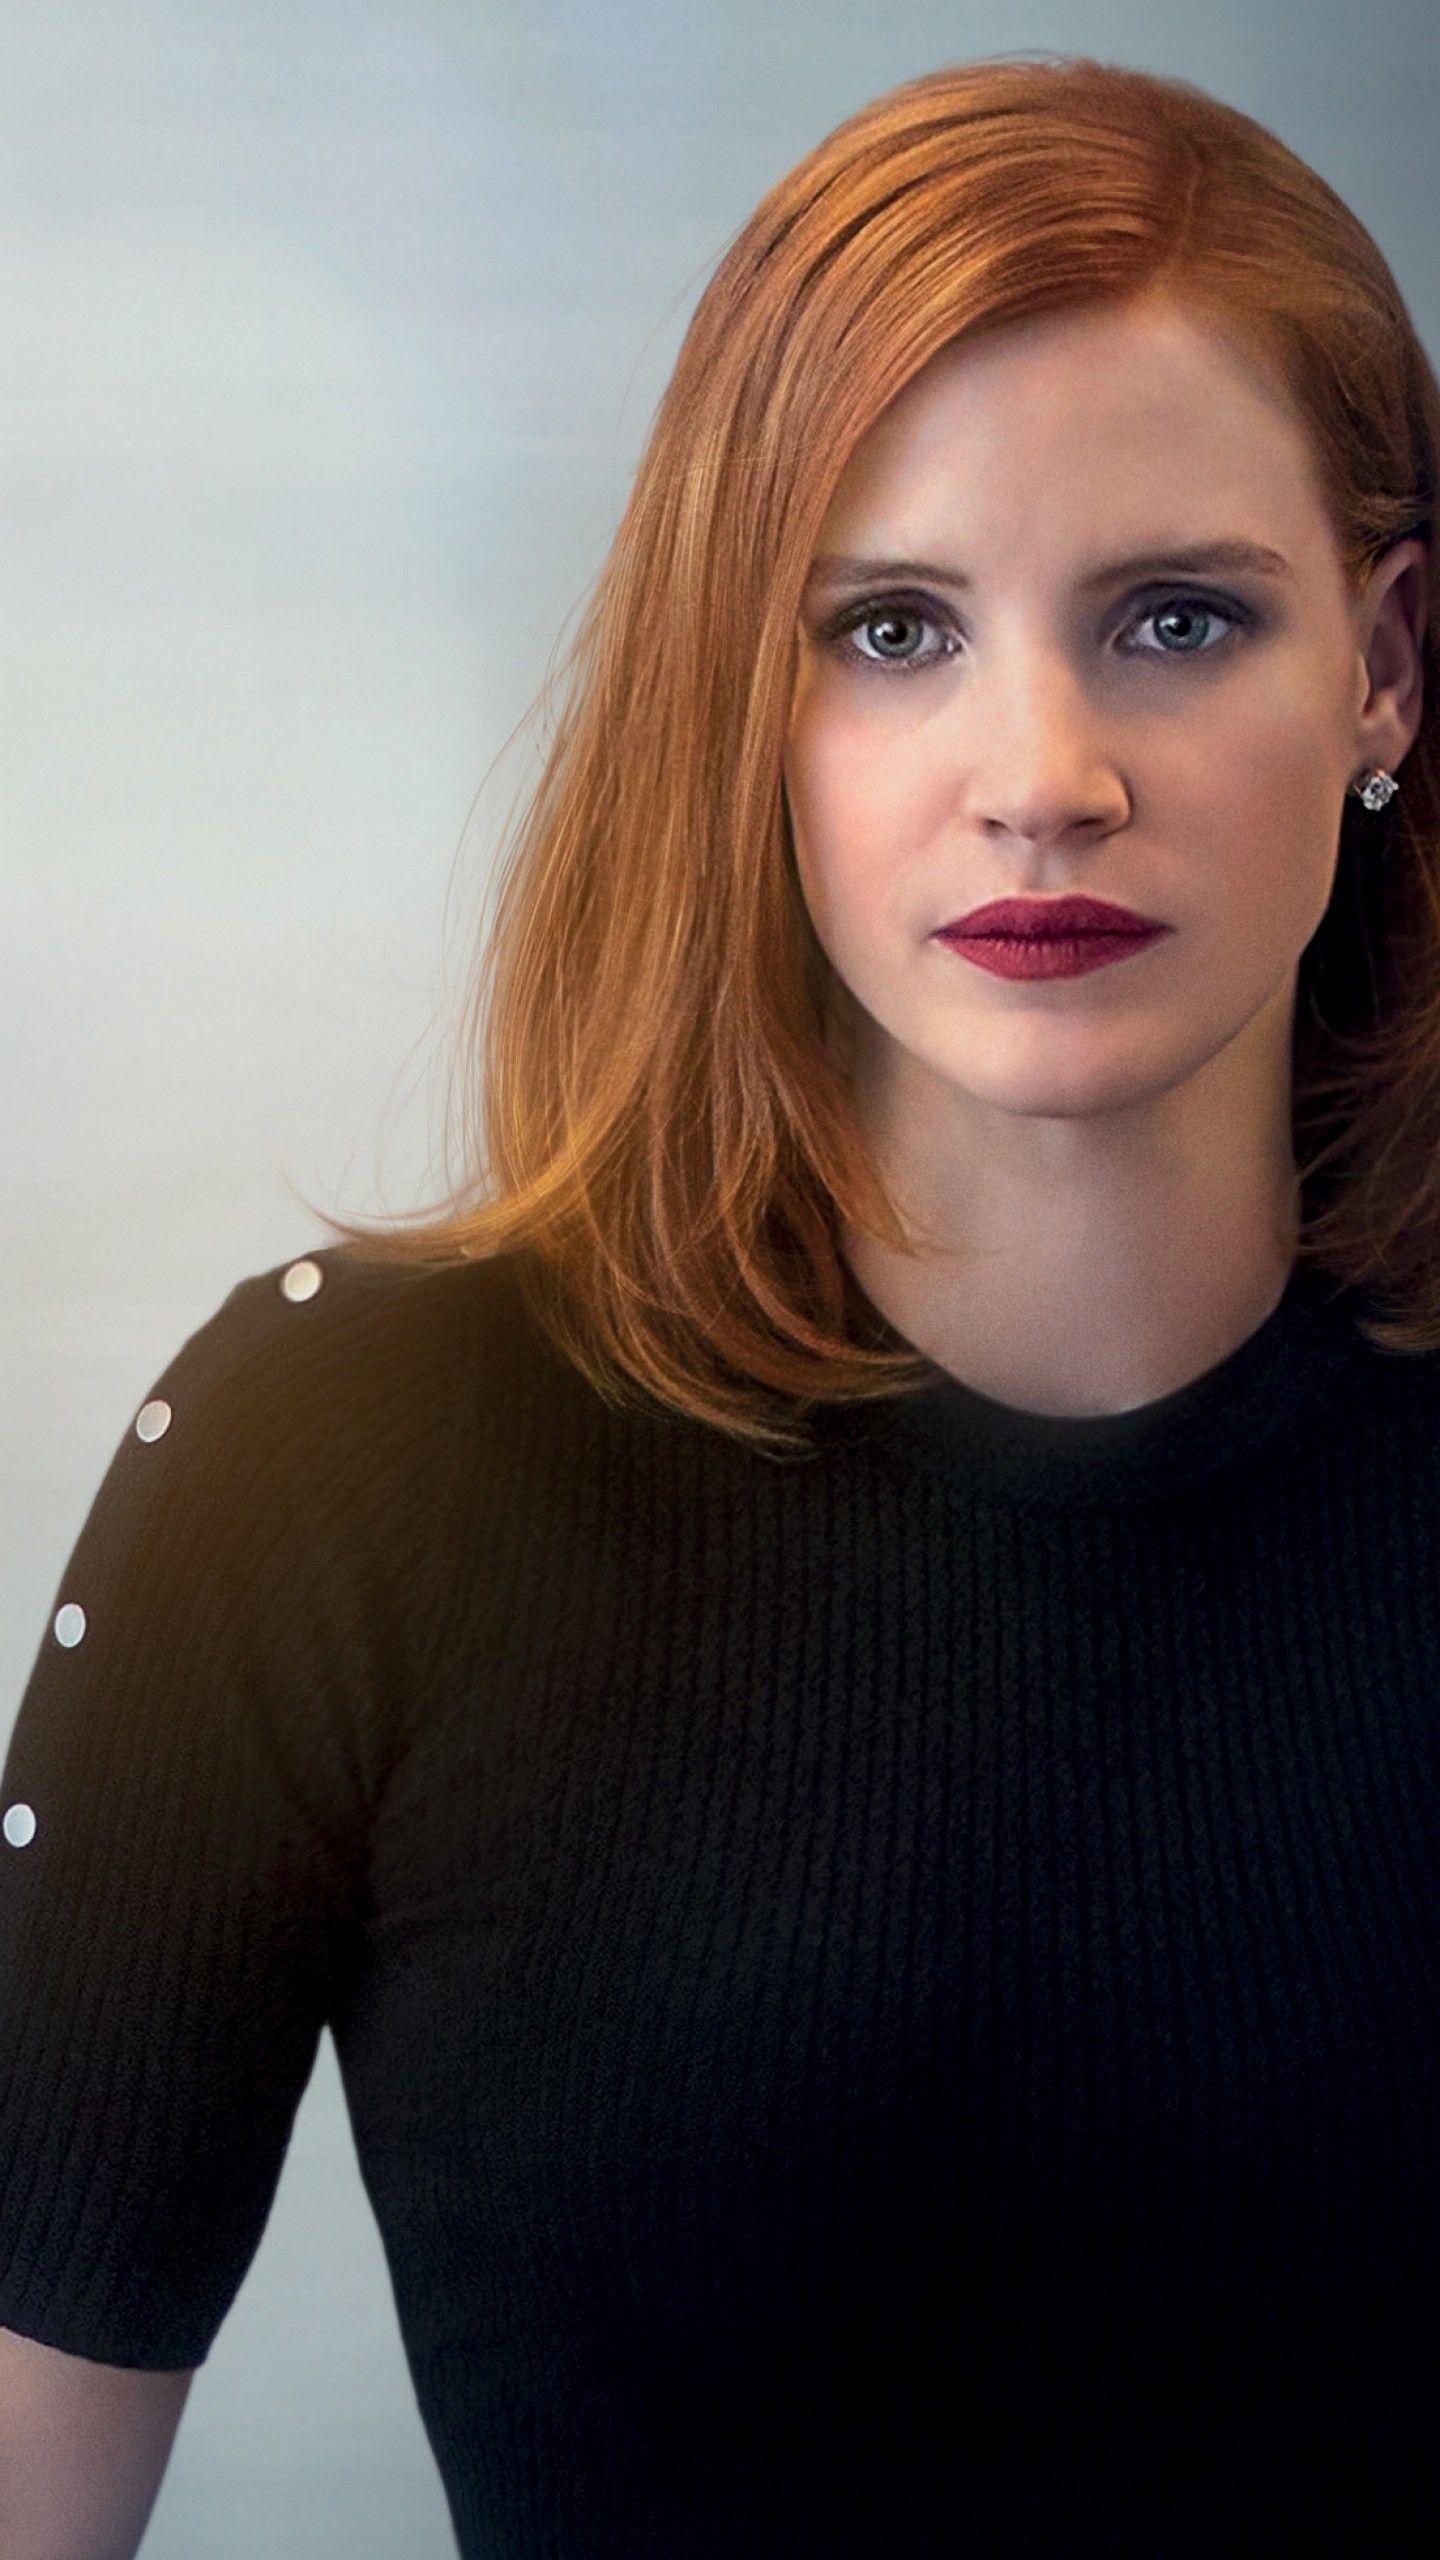 Jessica Chastain Wallpapers Top Free Jessica Chastain Images, Photos, Reviews